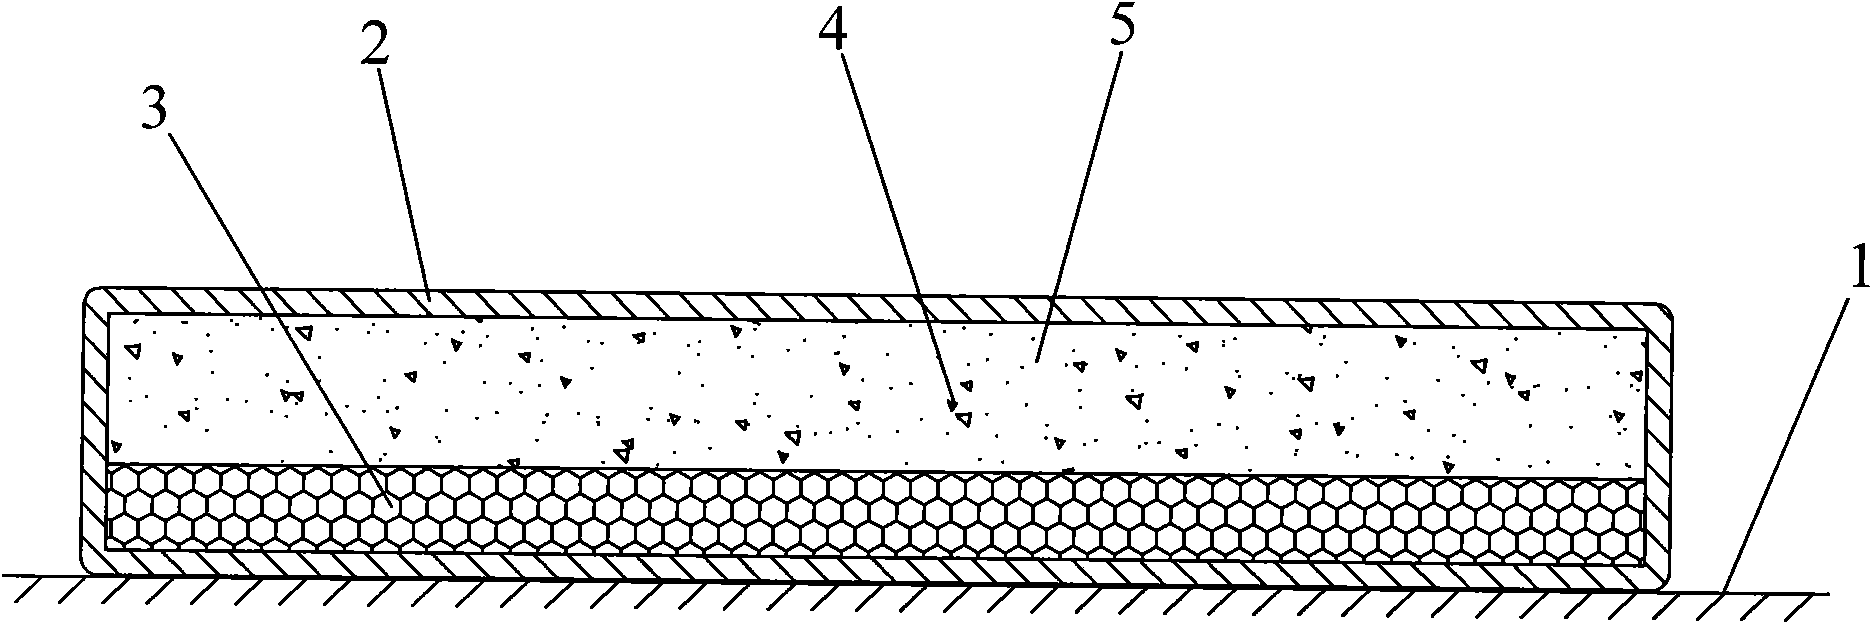 Spatial greening structure of wall surface